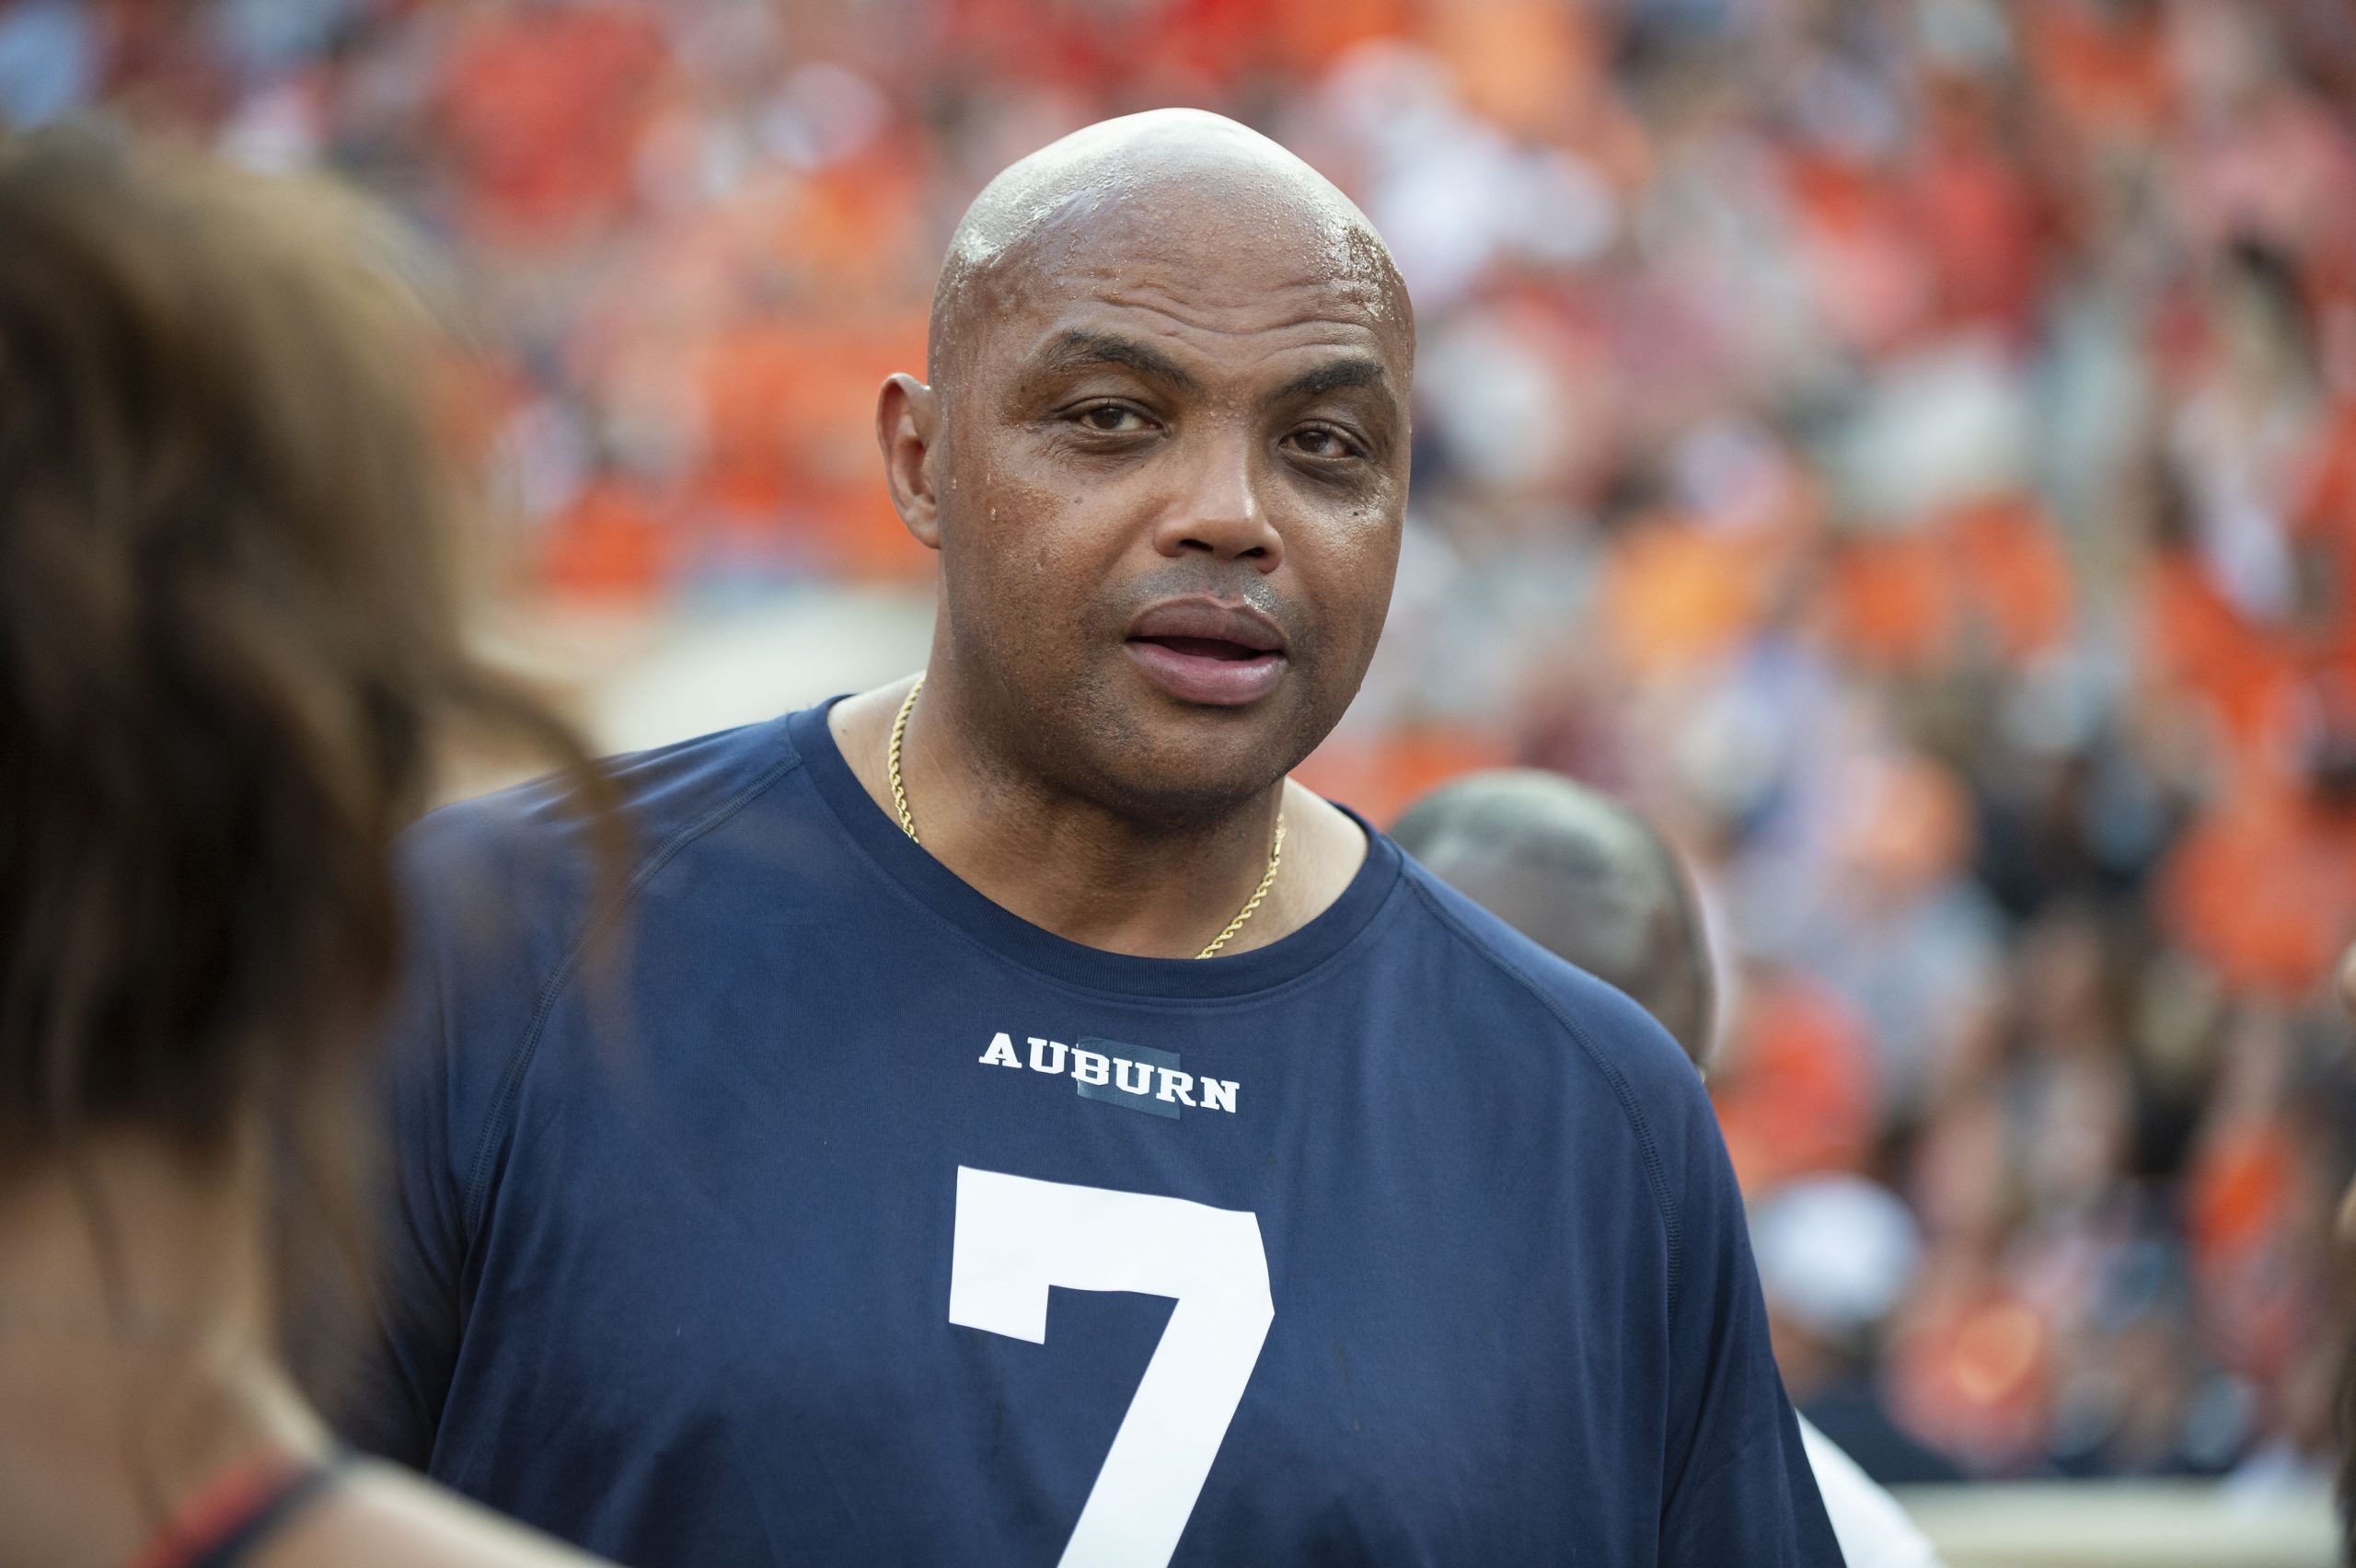 Charles Barkley talks with football fans prior to the matchup between the Auburn Tigers and the Mississippi State Bulldogs in 2019.